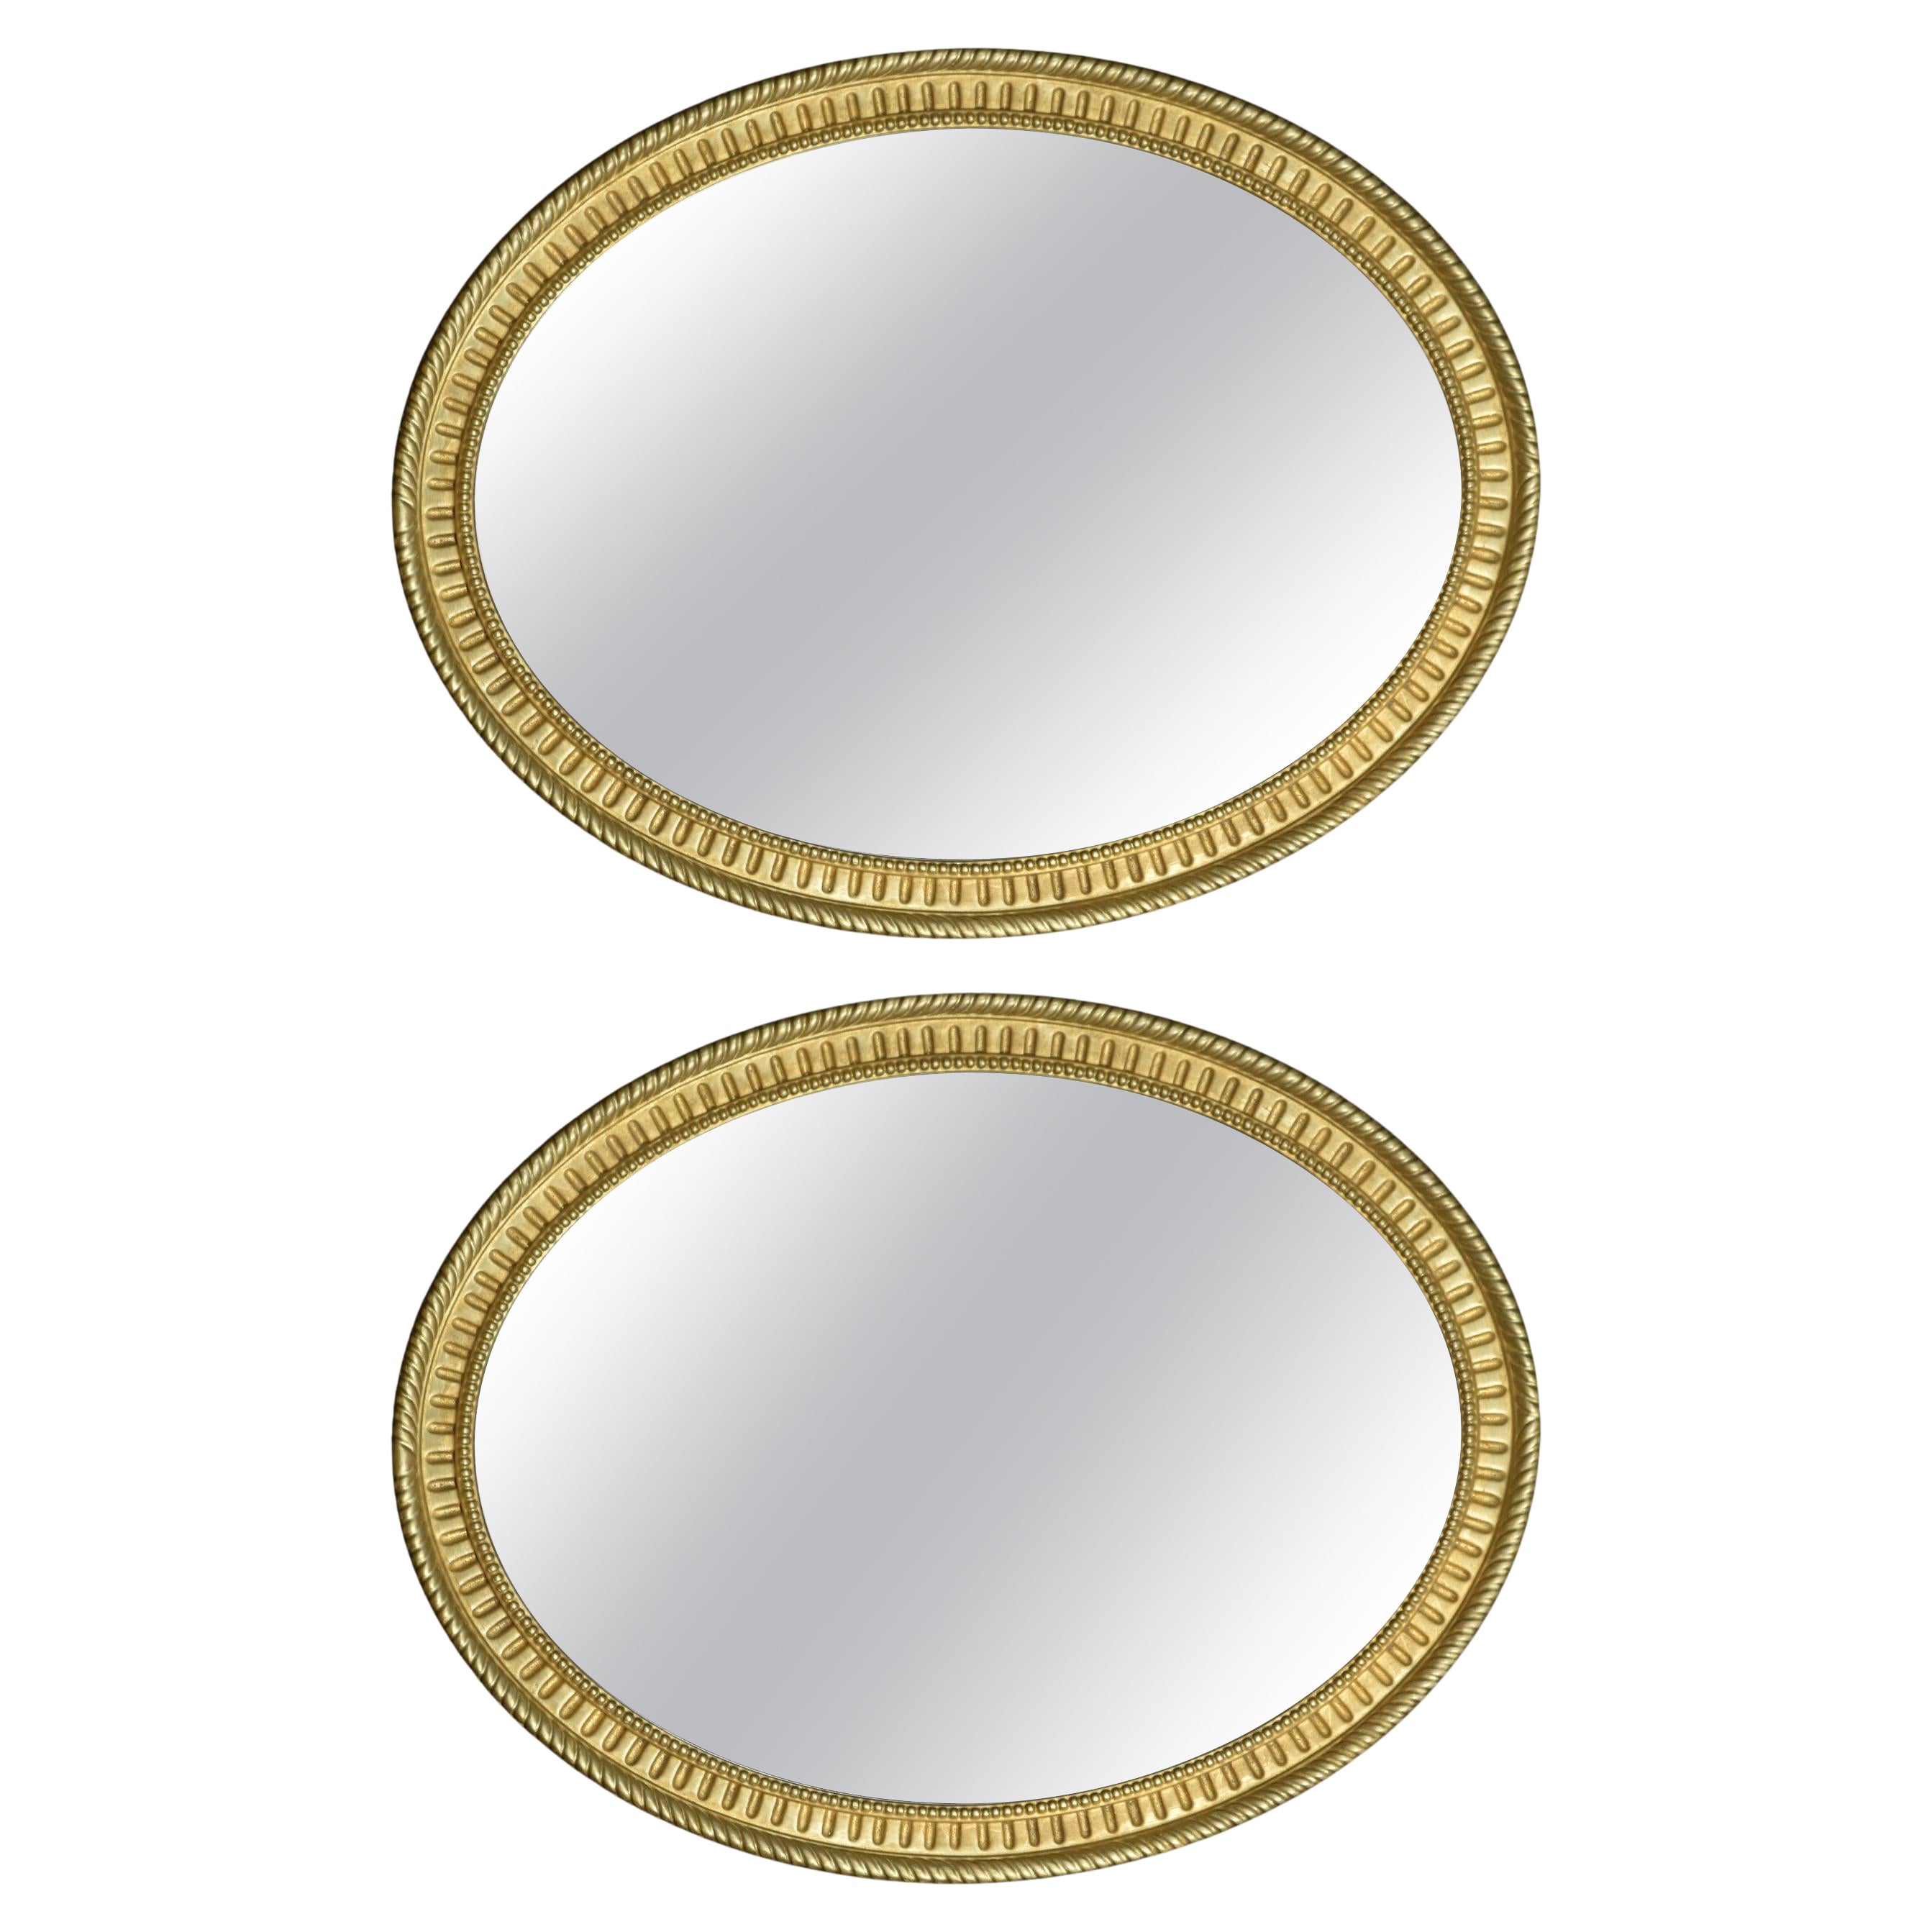 Pair of oval wall mirrors